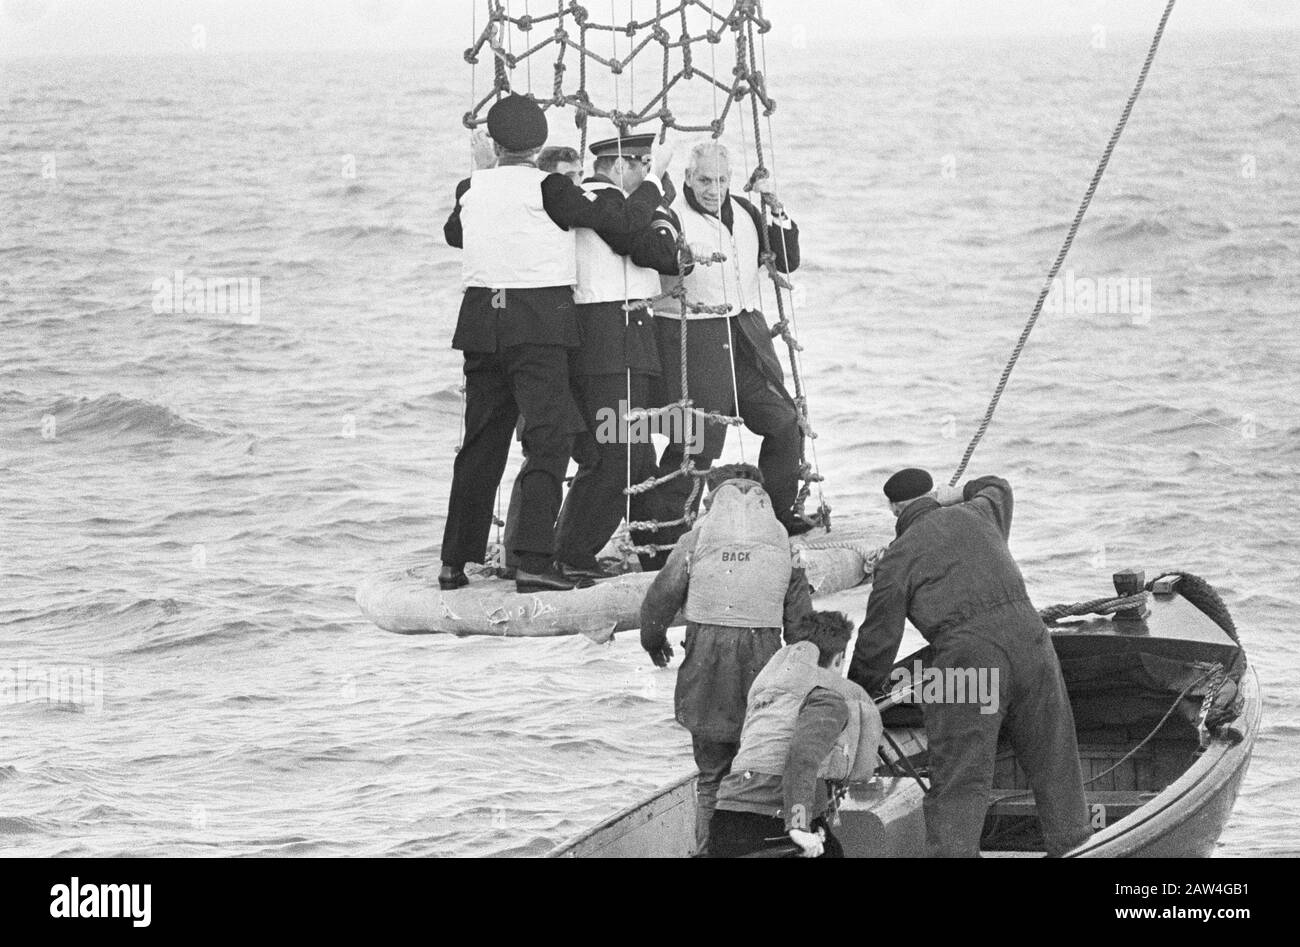 REM Island occupied the subsituut officer Mr. Nube boarding (in the cage on the right). Date: December 17, 1964 Keywords: occupations, cages Institution Name: REM island Stock Photo